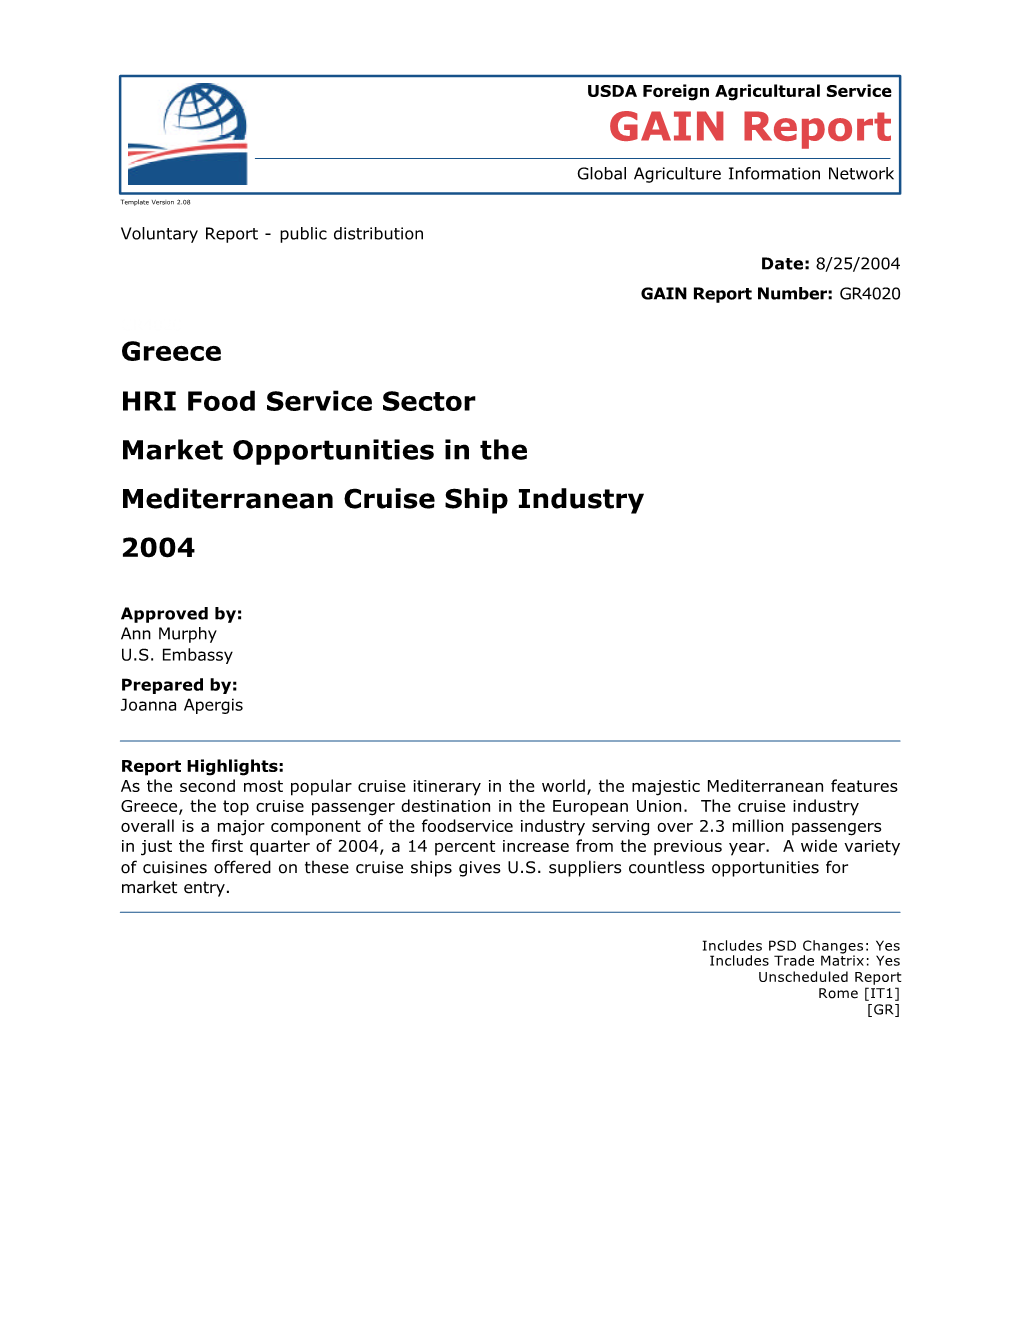 Greece HRI Food Service Sector Market Opportunities in the Mediterranean Cruise Ship Industry 2004